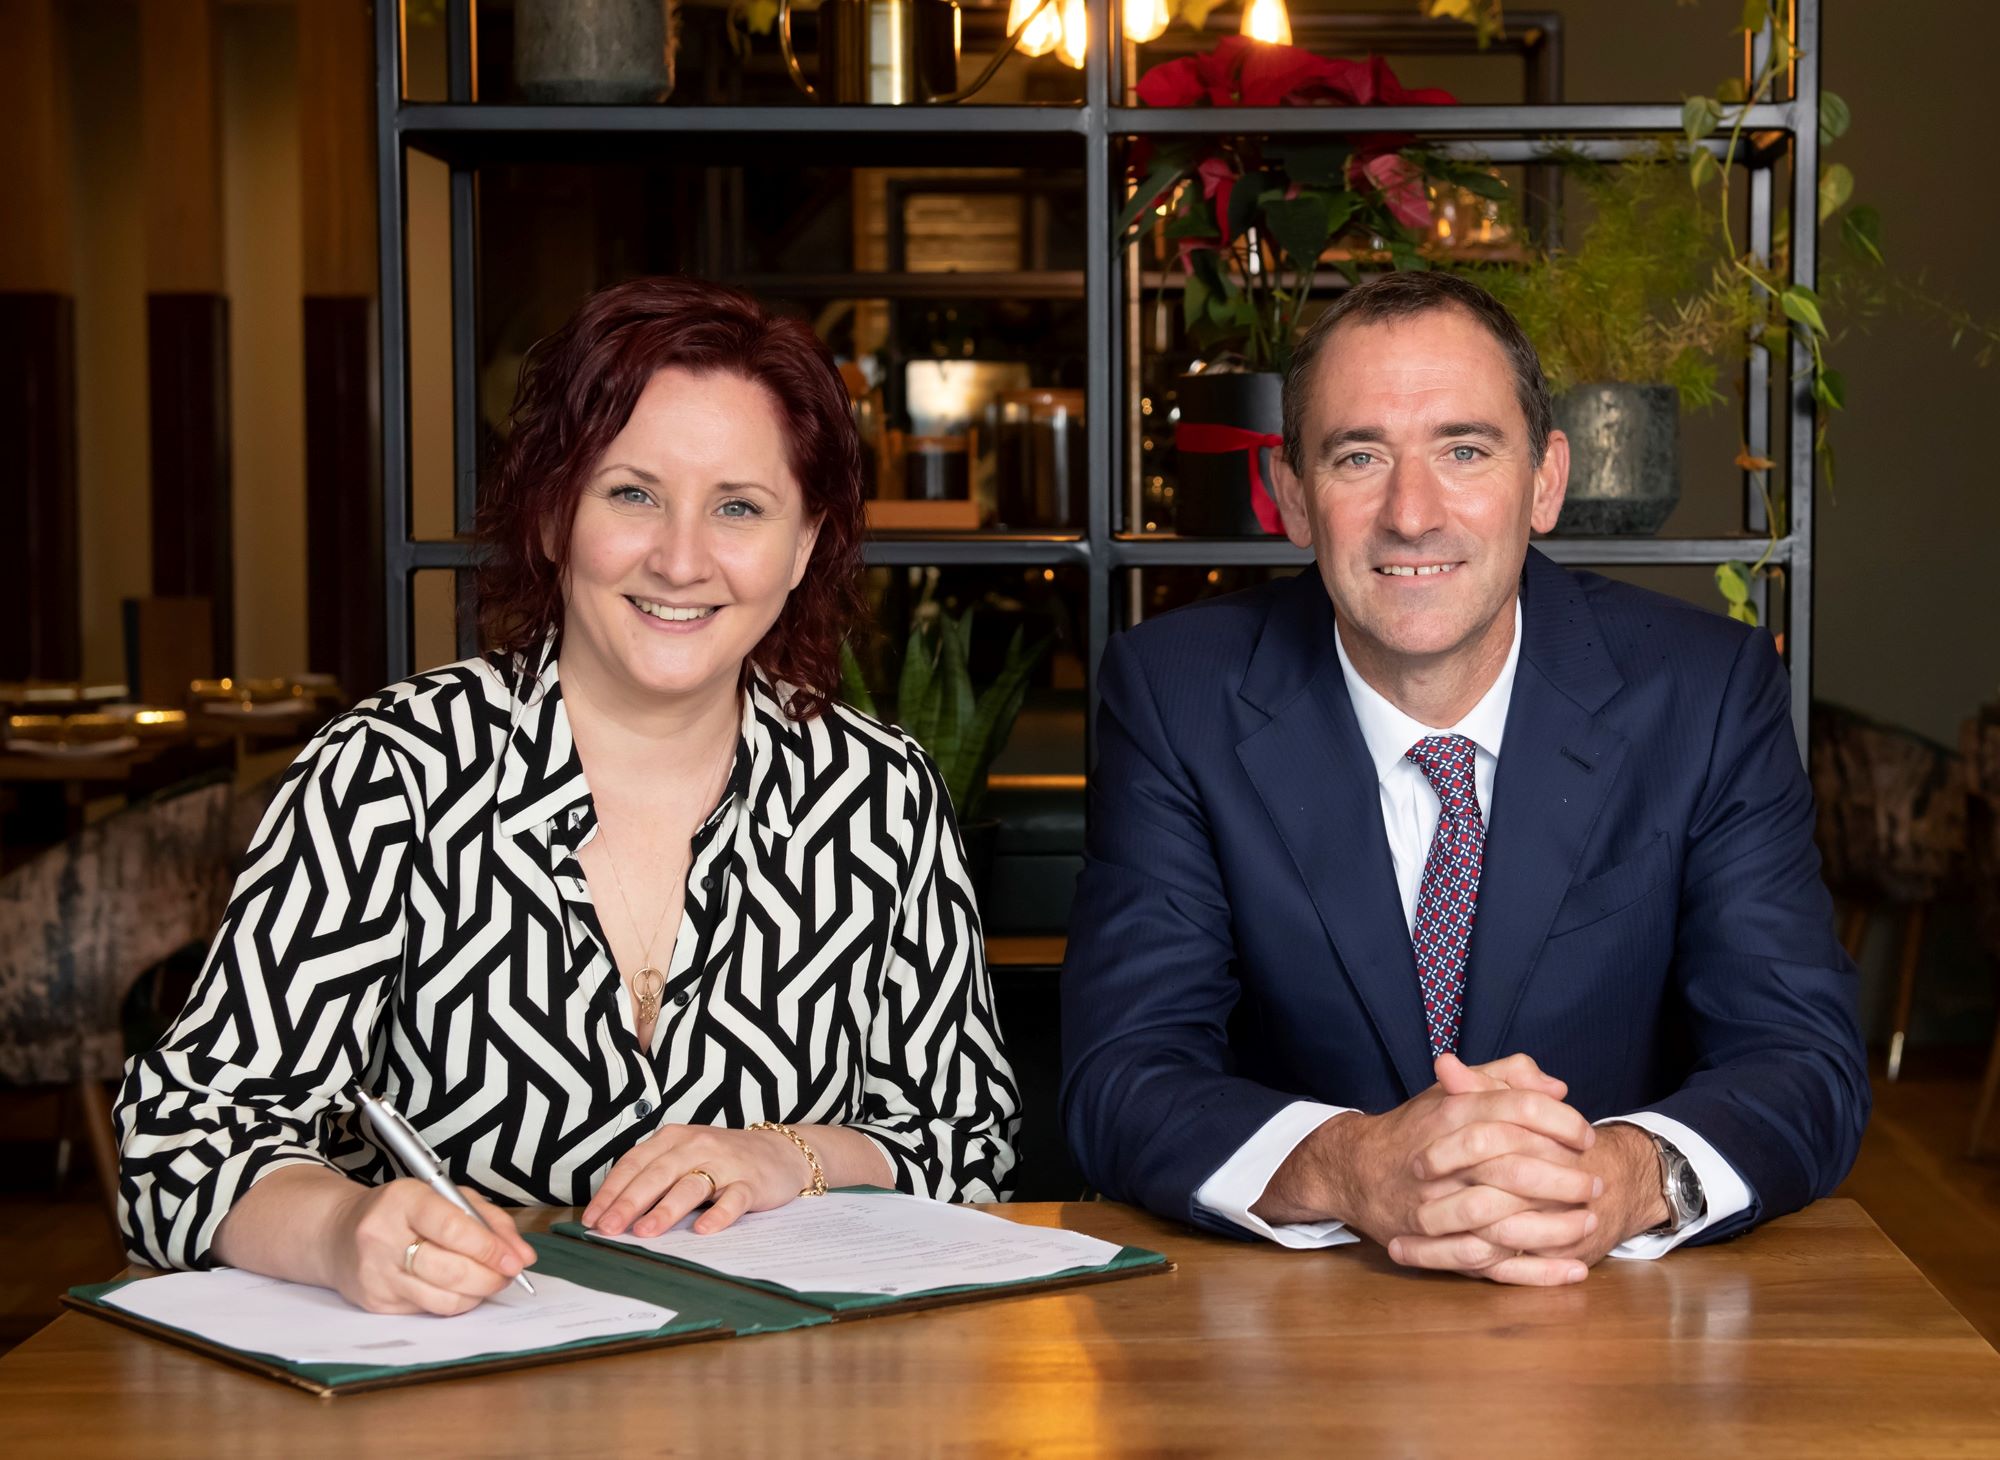 Jennifer Willis, DESA Head Recycling, and Mark Loveridge, Business Unit Director for Precious Metals Recovery at The Royal Mint, sign a sales agreement between DESA and The Royal Mint.